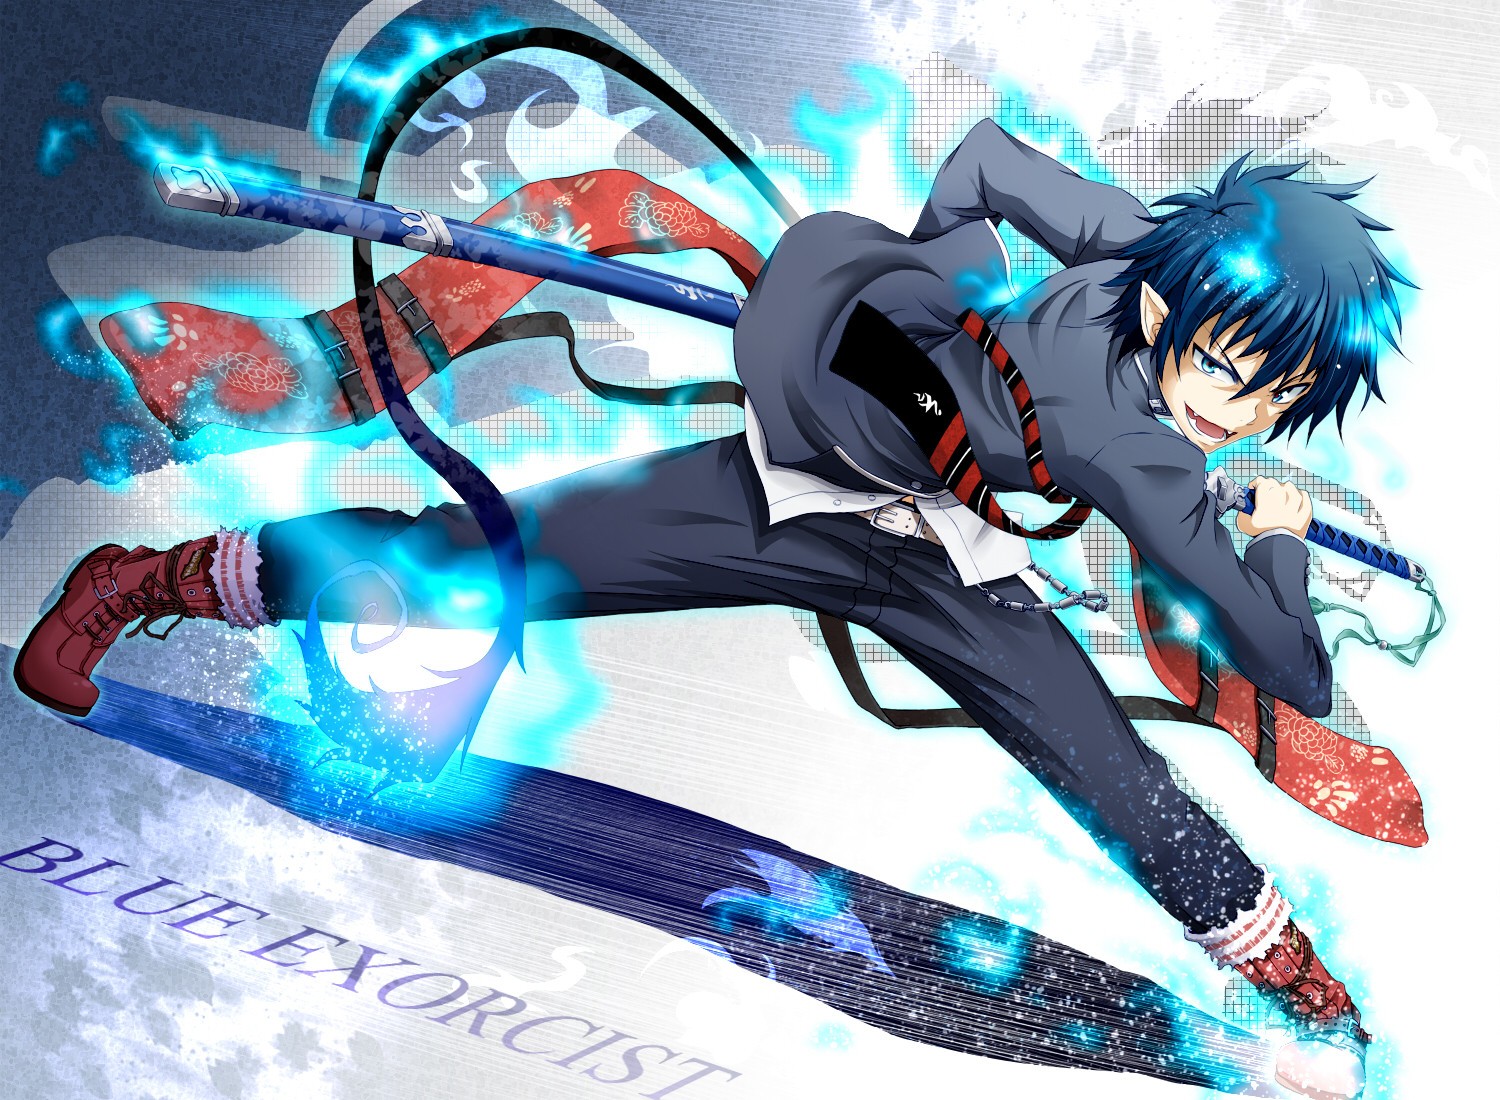 1. "Blue Exorcist" - wide 6